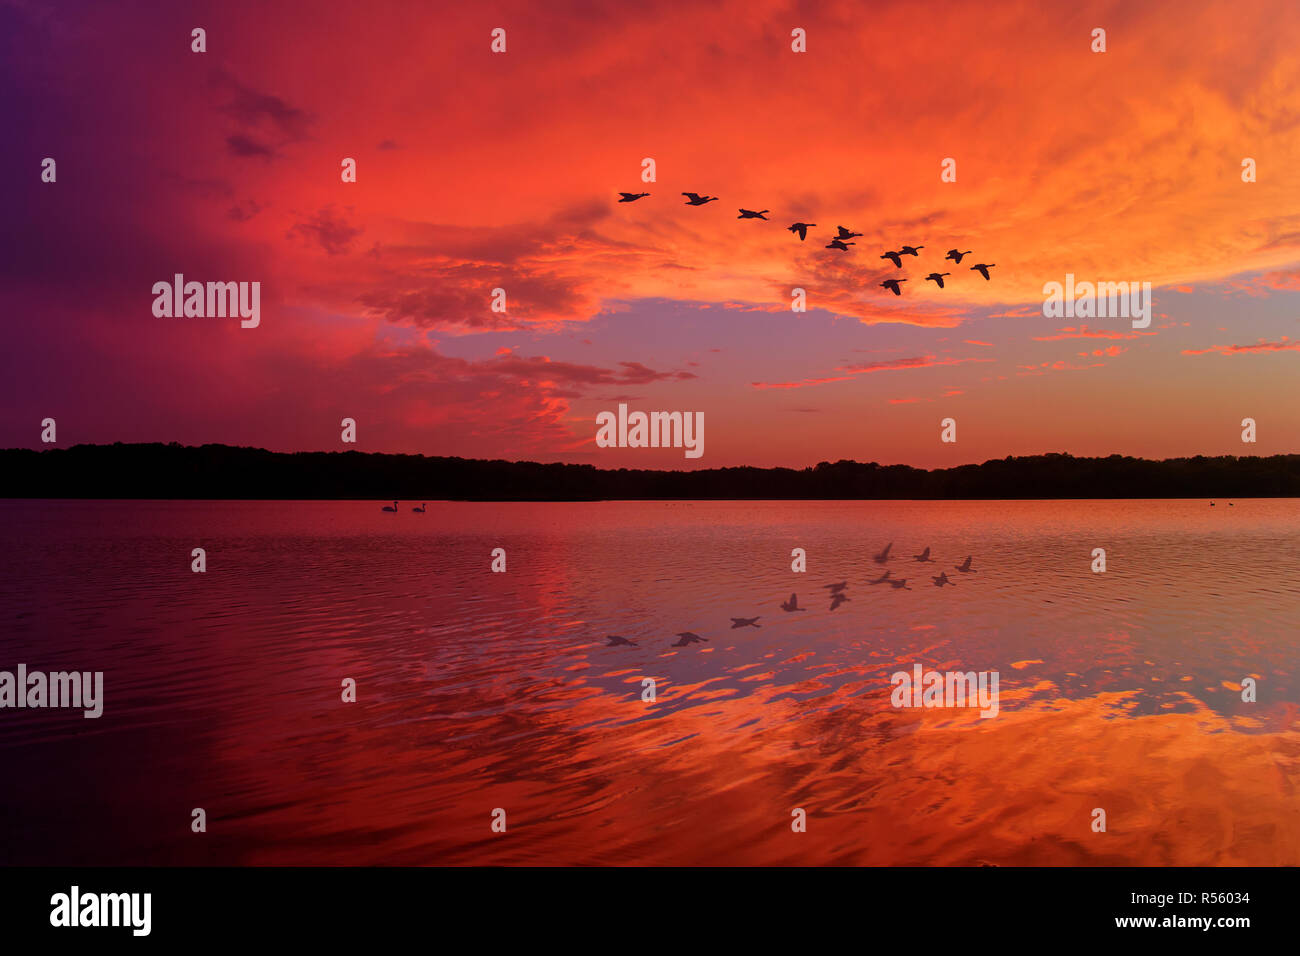 Stunning Sunset Sky Reflected on Relaxing Lake With Canadian Geese Flying Overhead Stock Photo